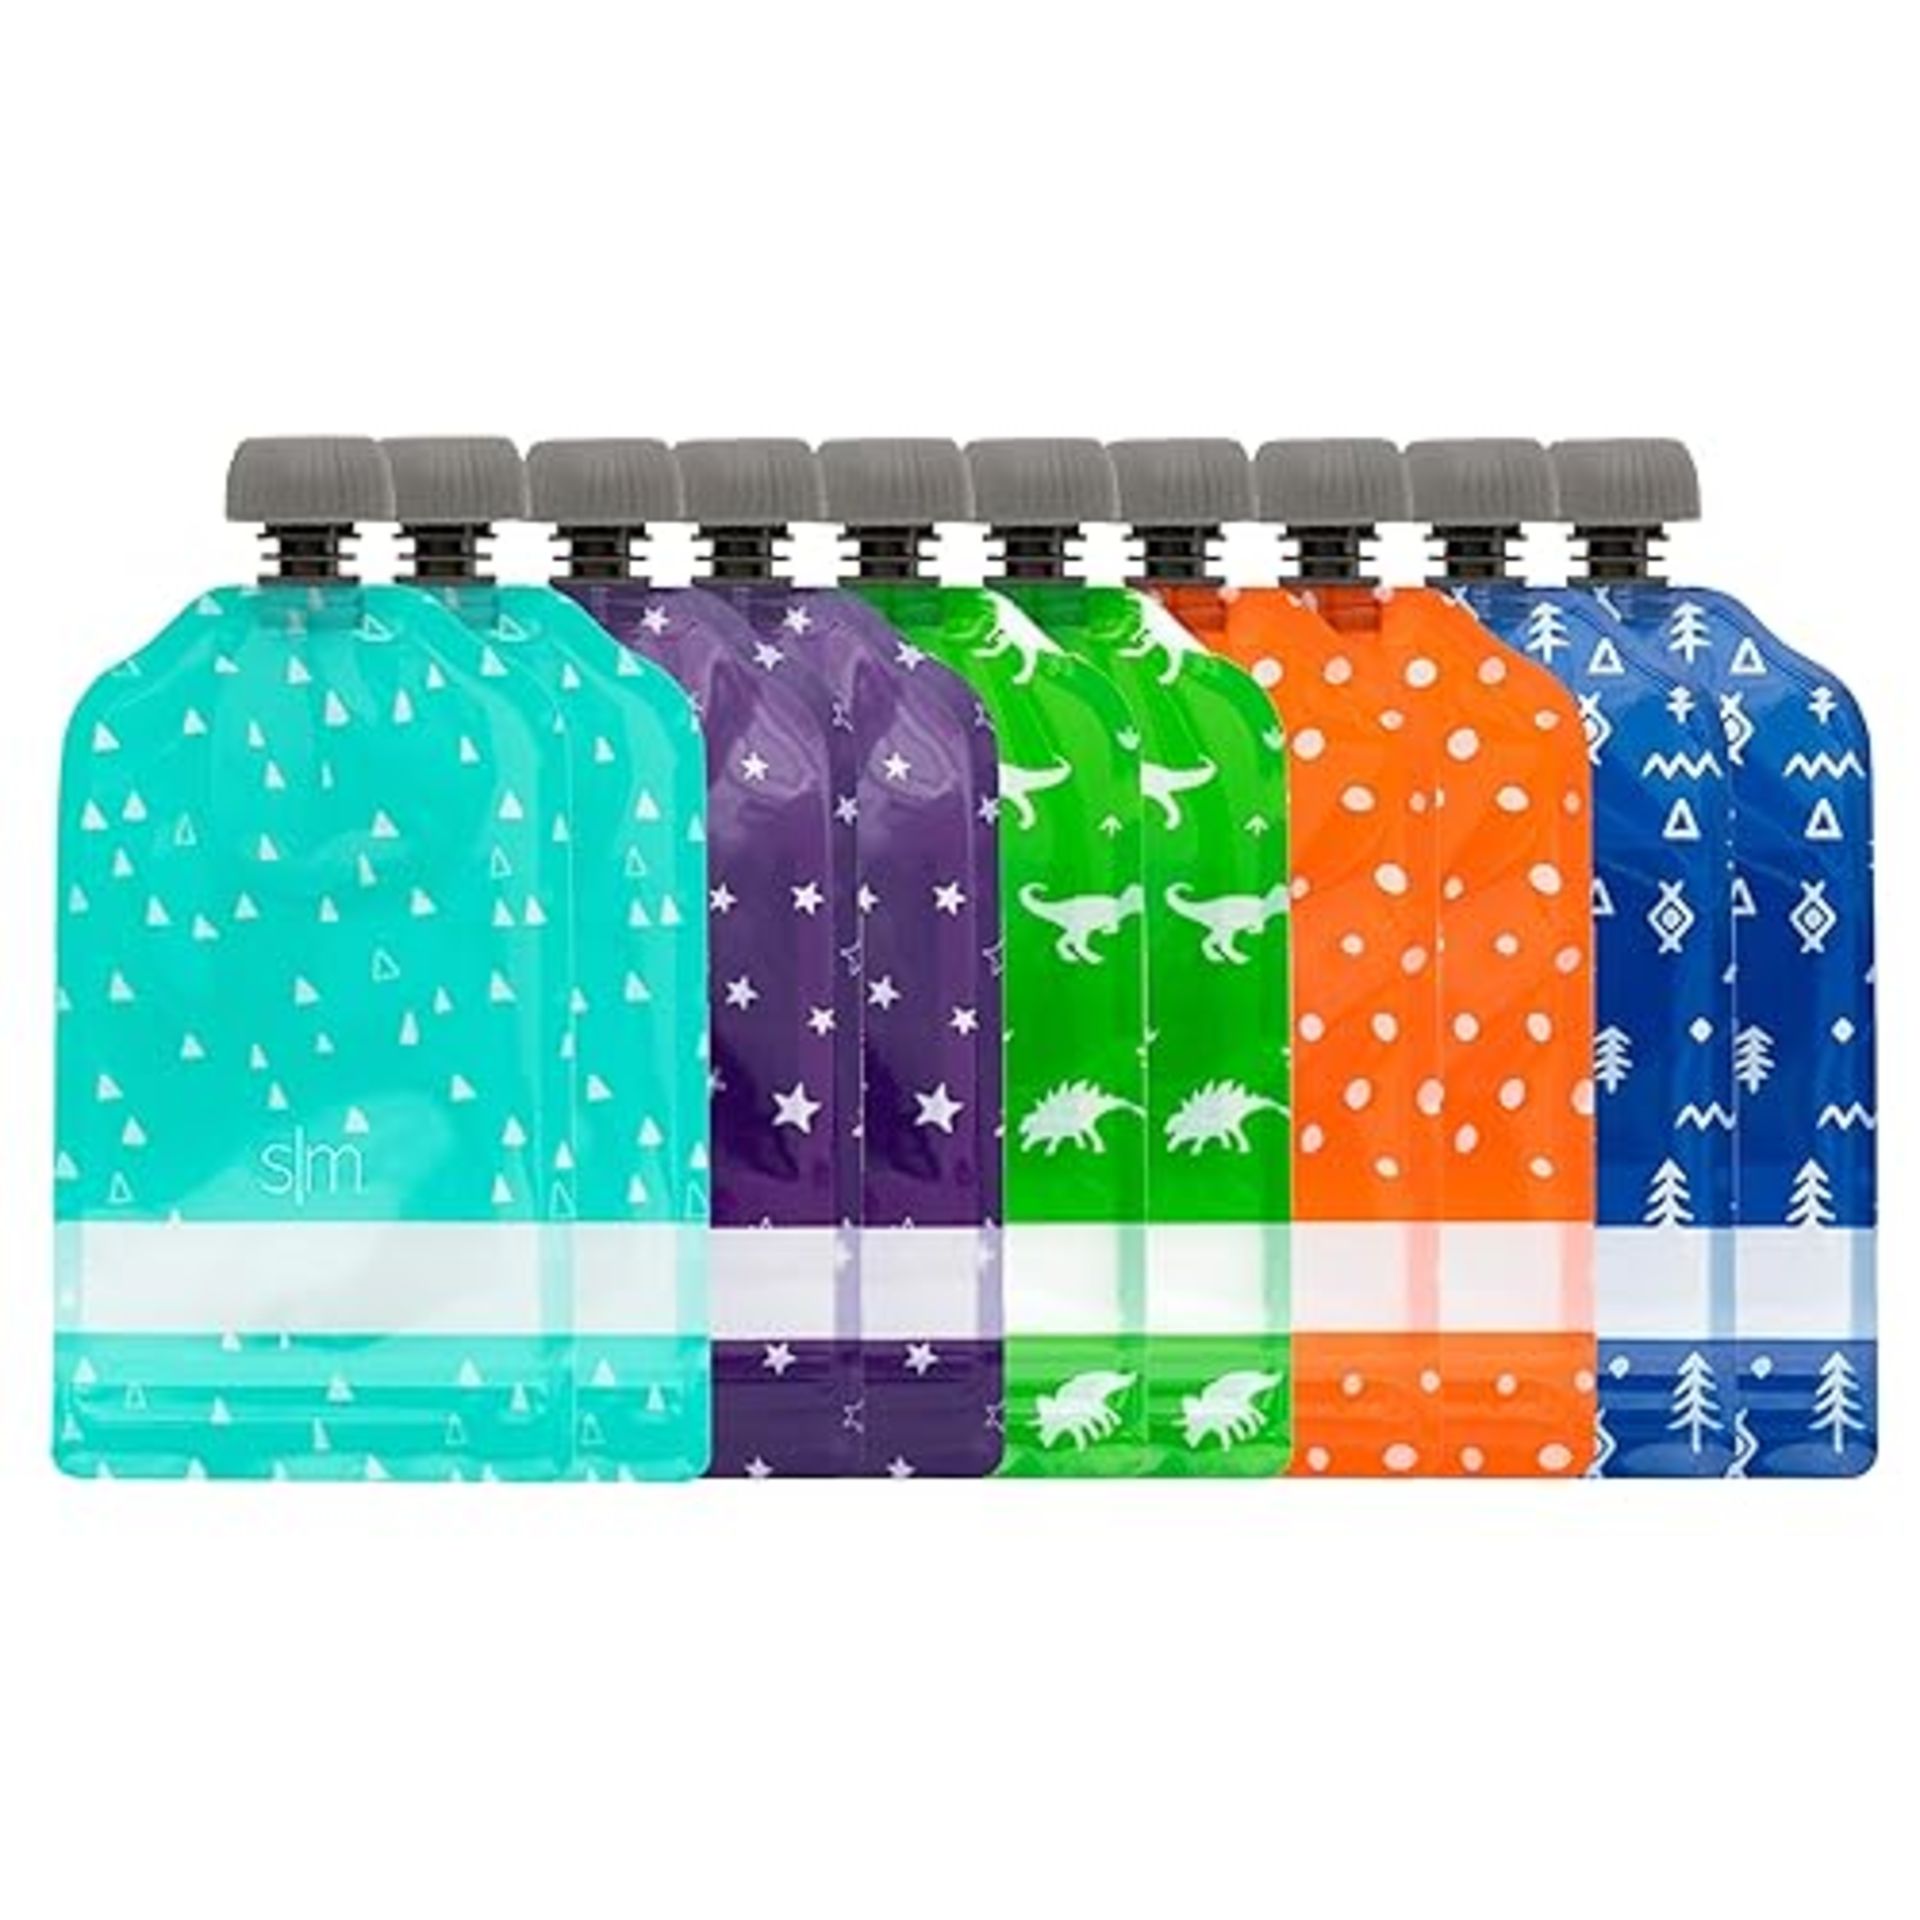 Simple Modern Baby Food Pouches | Reusable 10 Pack of BPA-Free Plastic Refillable Squeeze Pouch | J